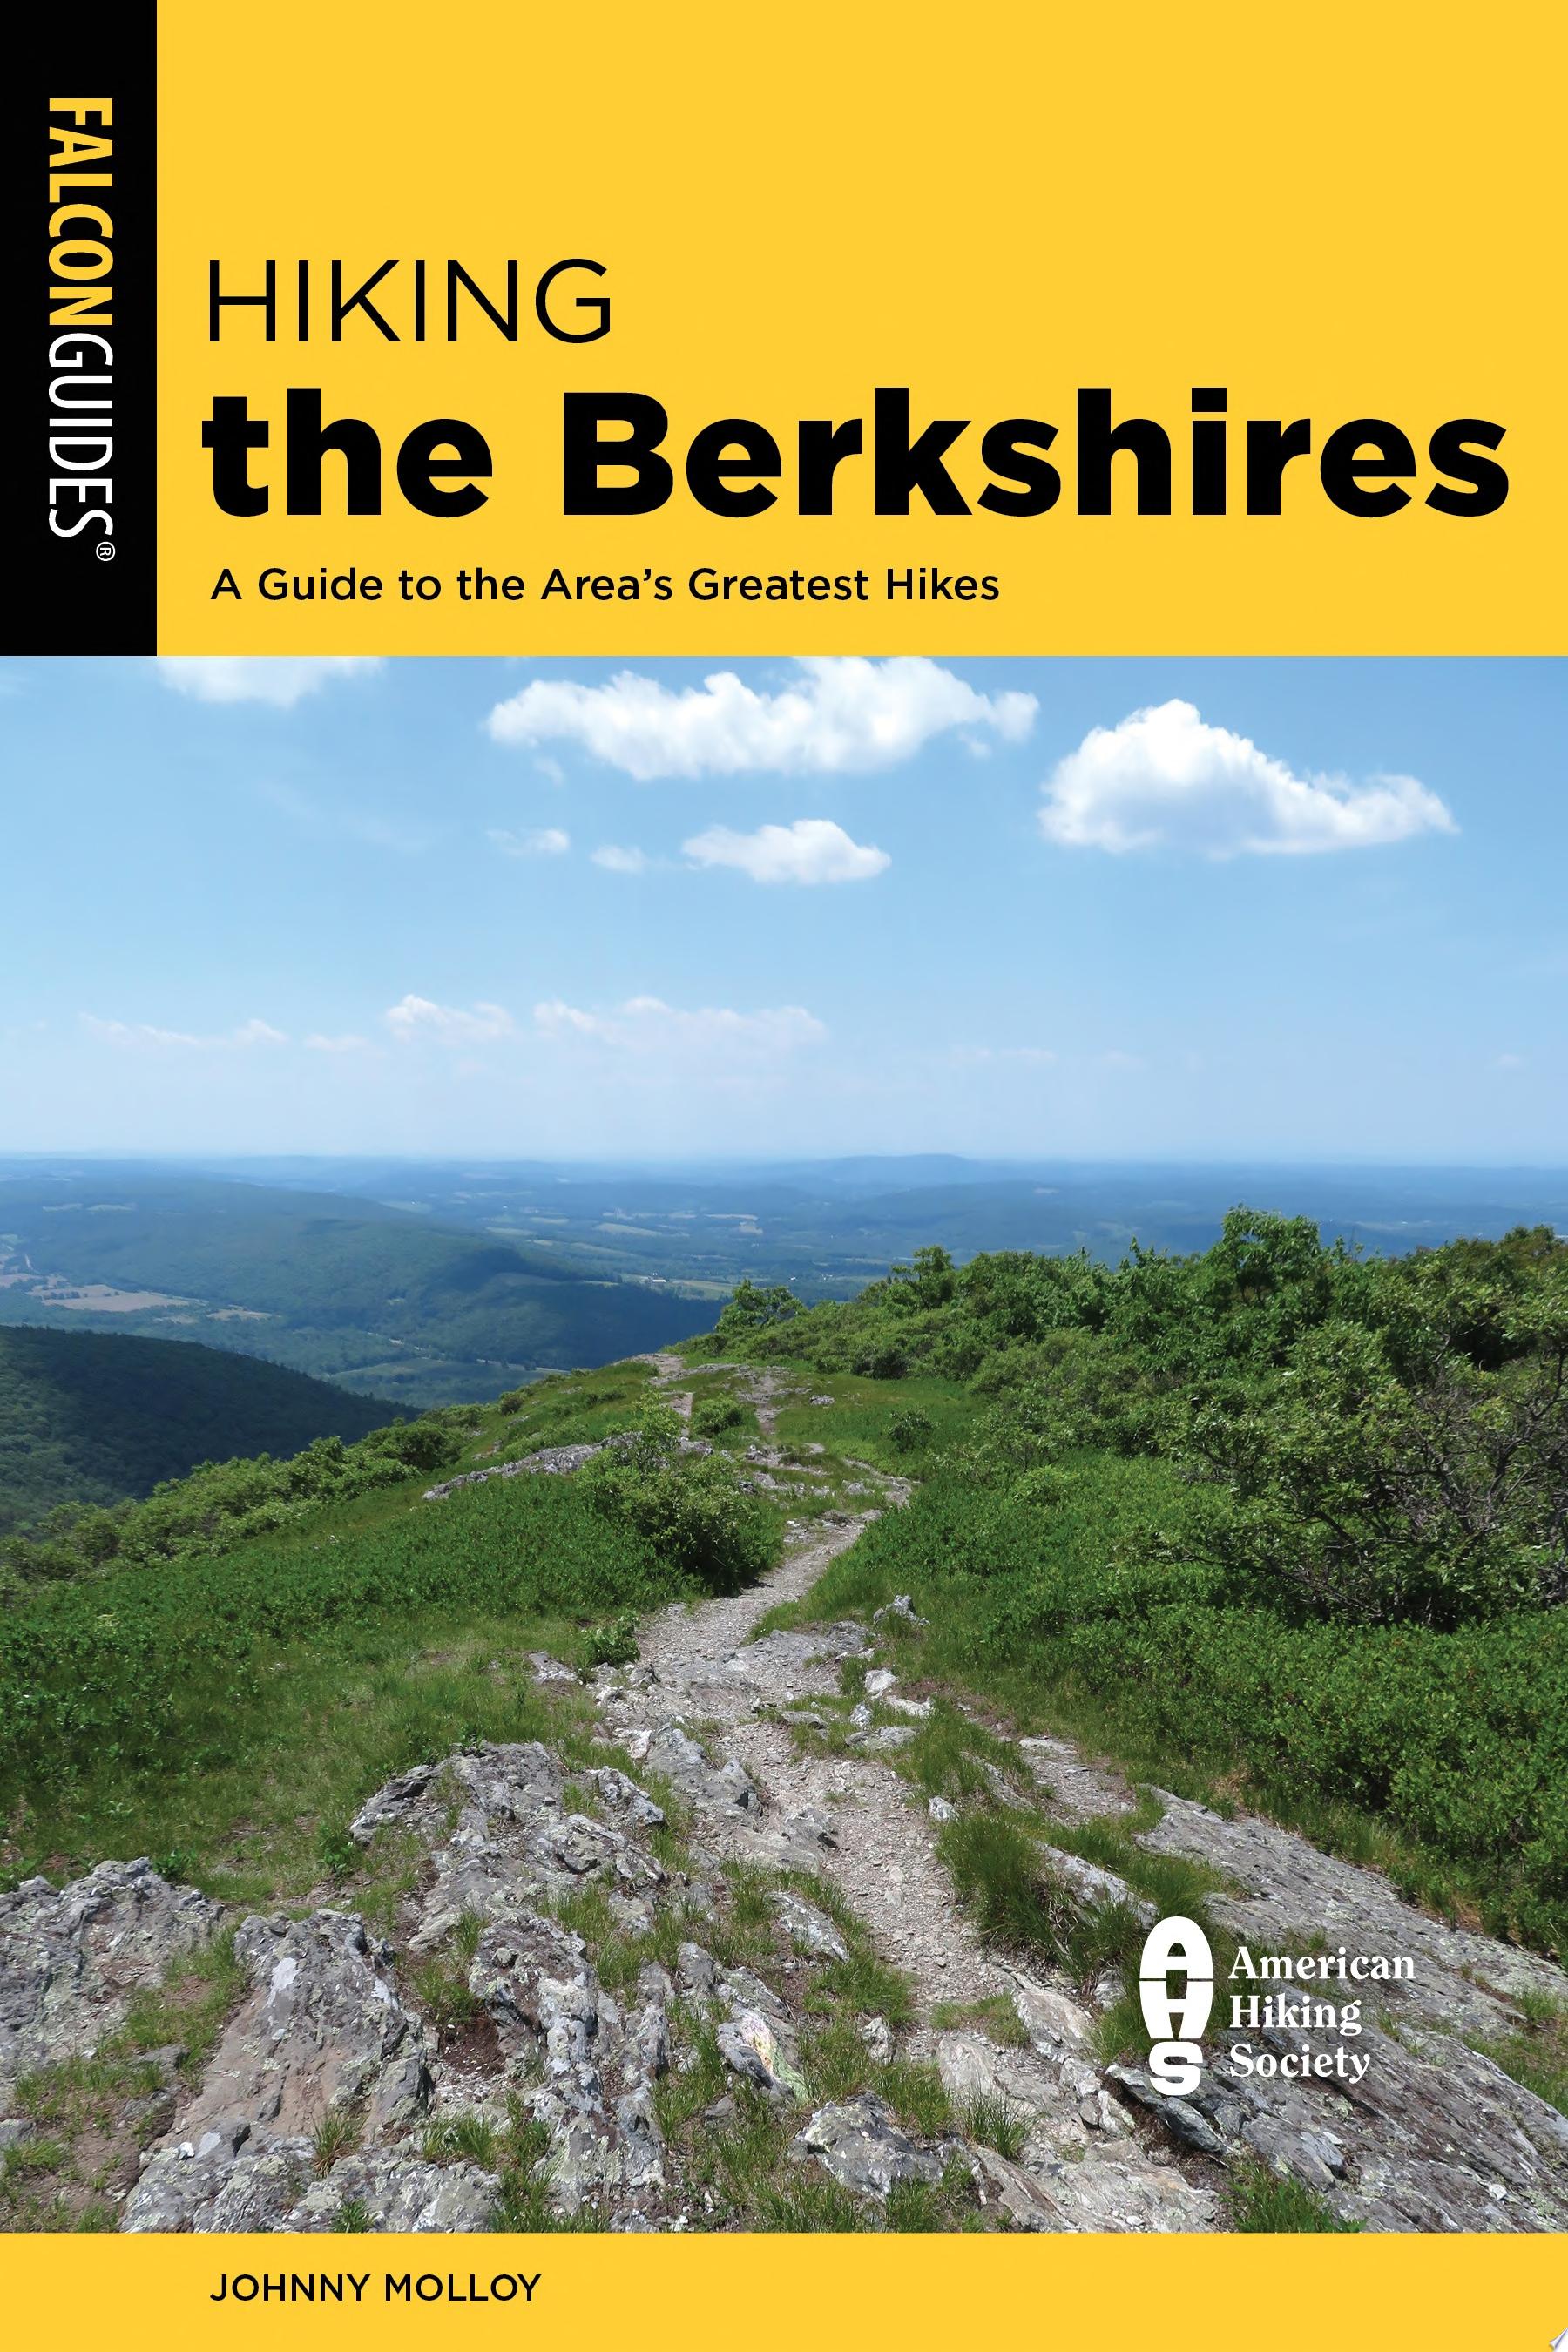 Image for "Hiking the Berkshires"